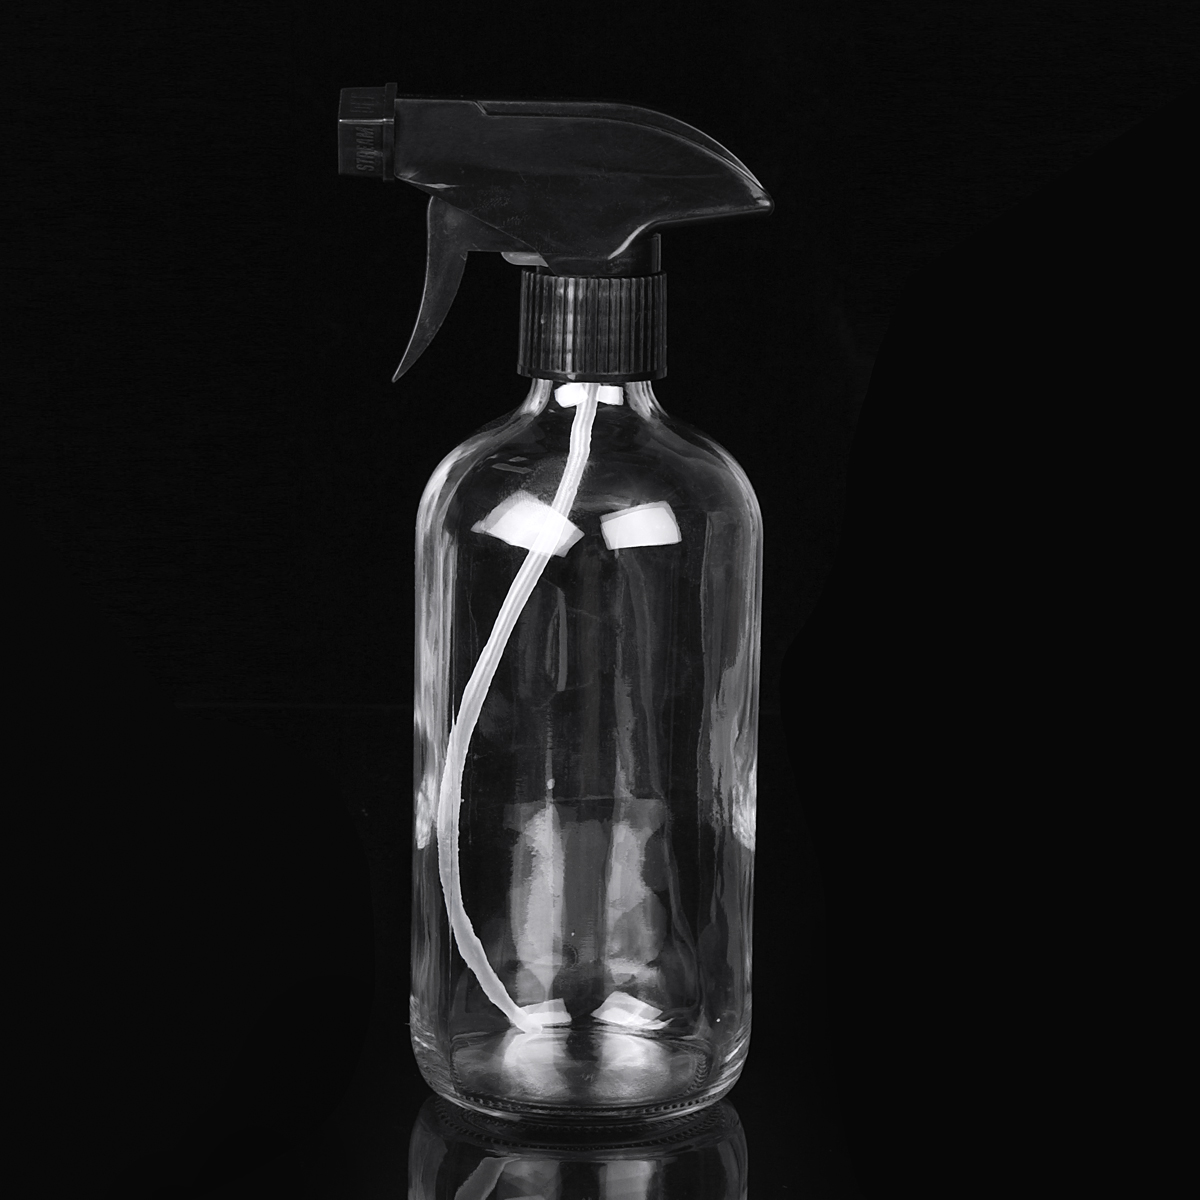 250ml500ml-Clear-Glass-Bottle-With-Trigger-Sprayer-Cap-Essential-Oil-Water-Spraying-Bottle-1690680-6